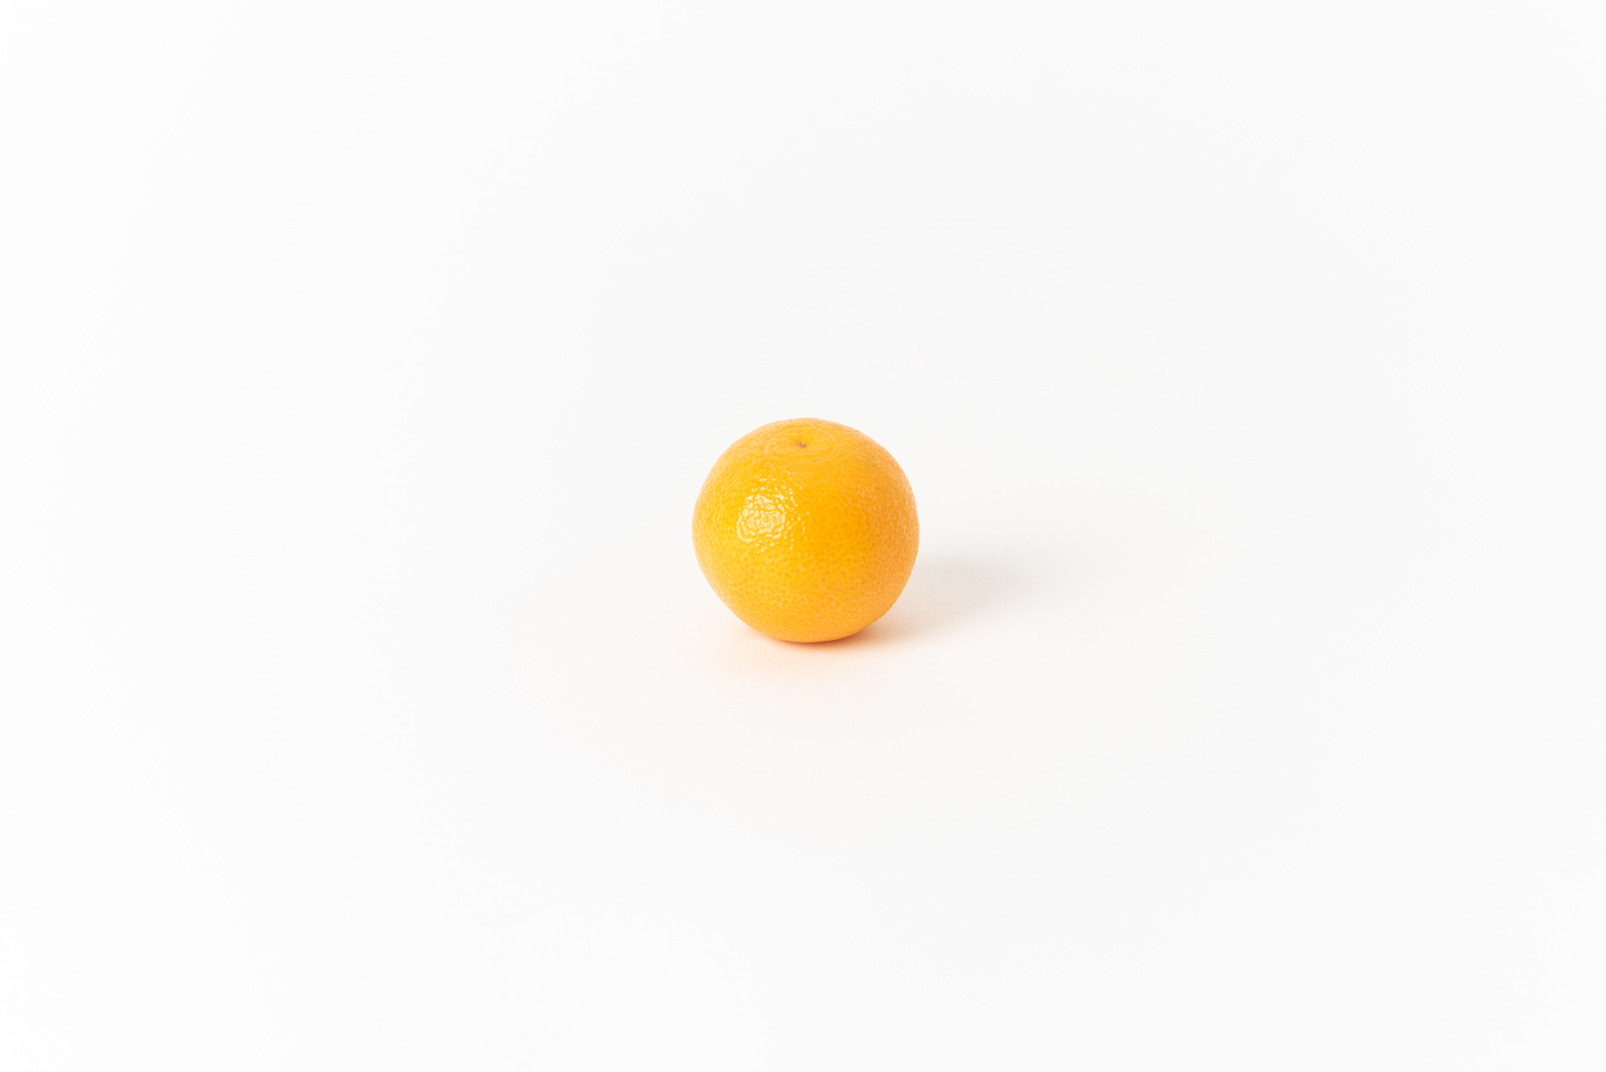 Orange is one of the world's most popular fruits